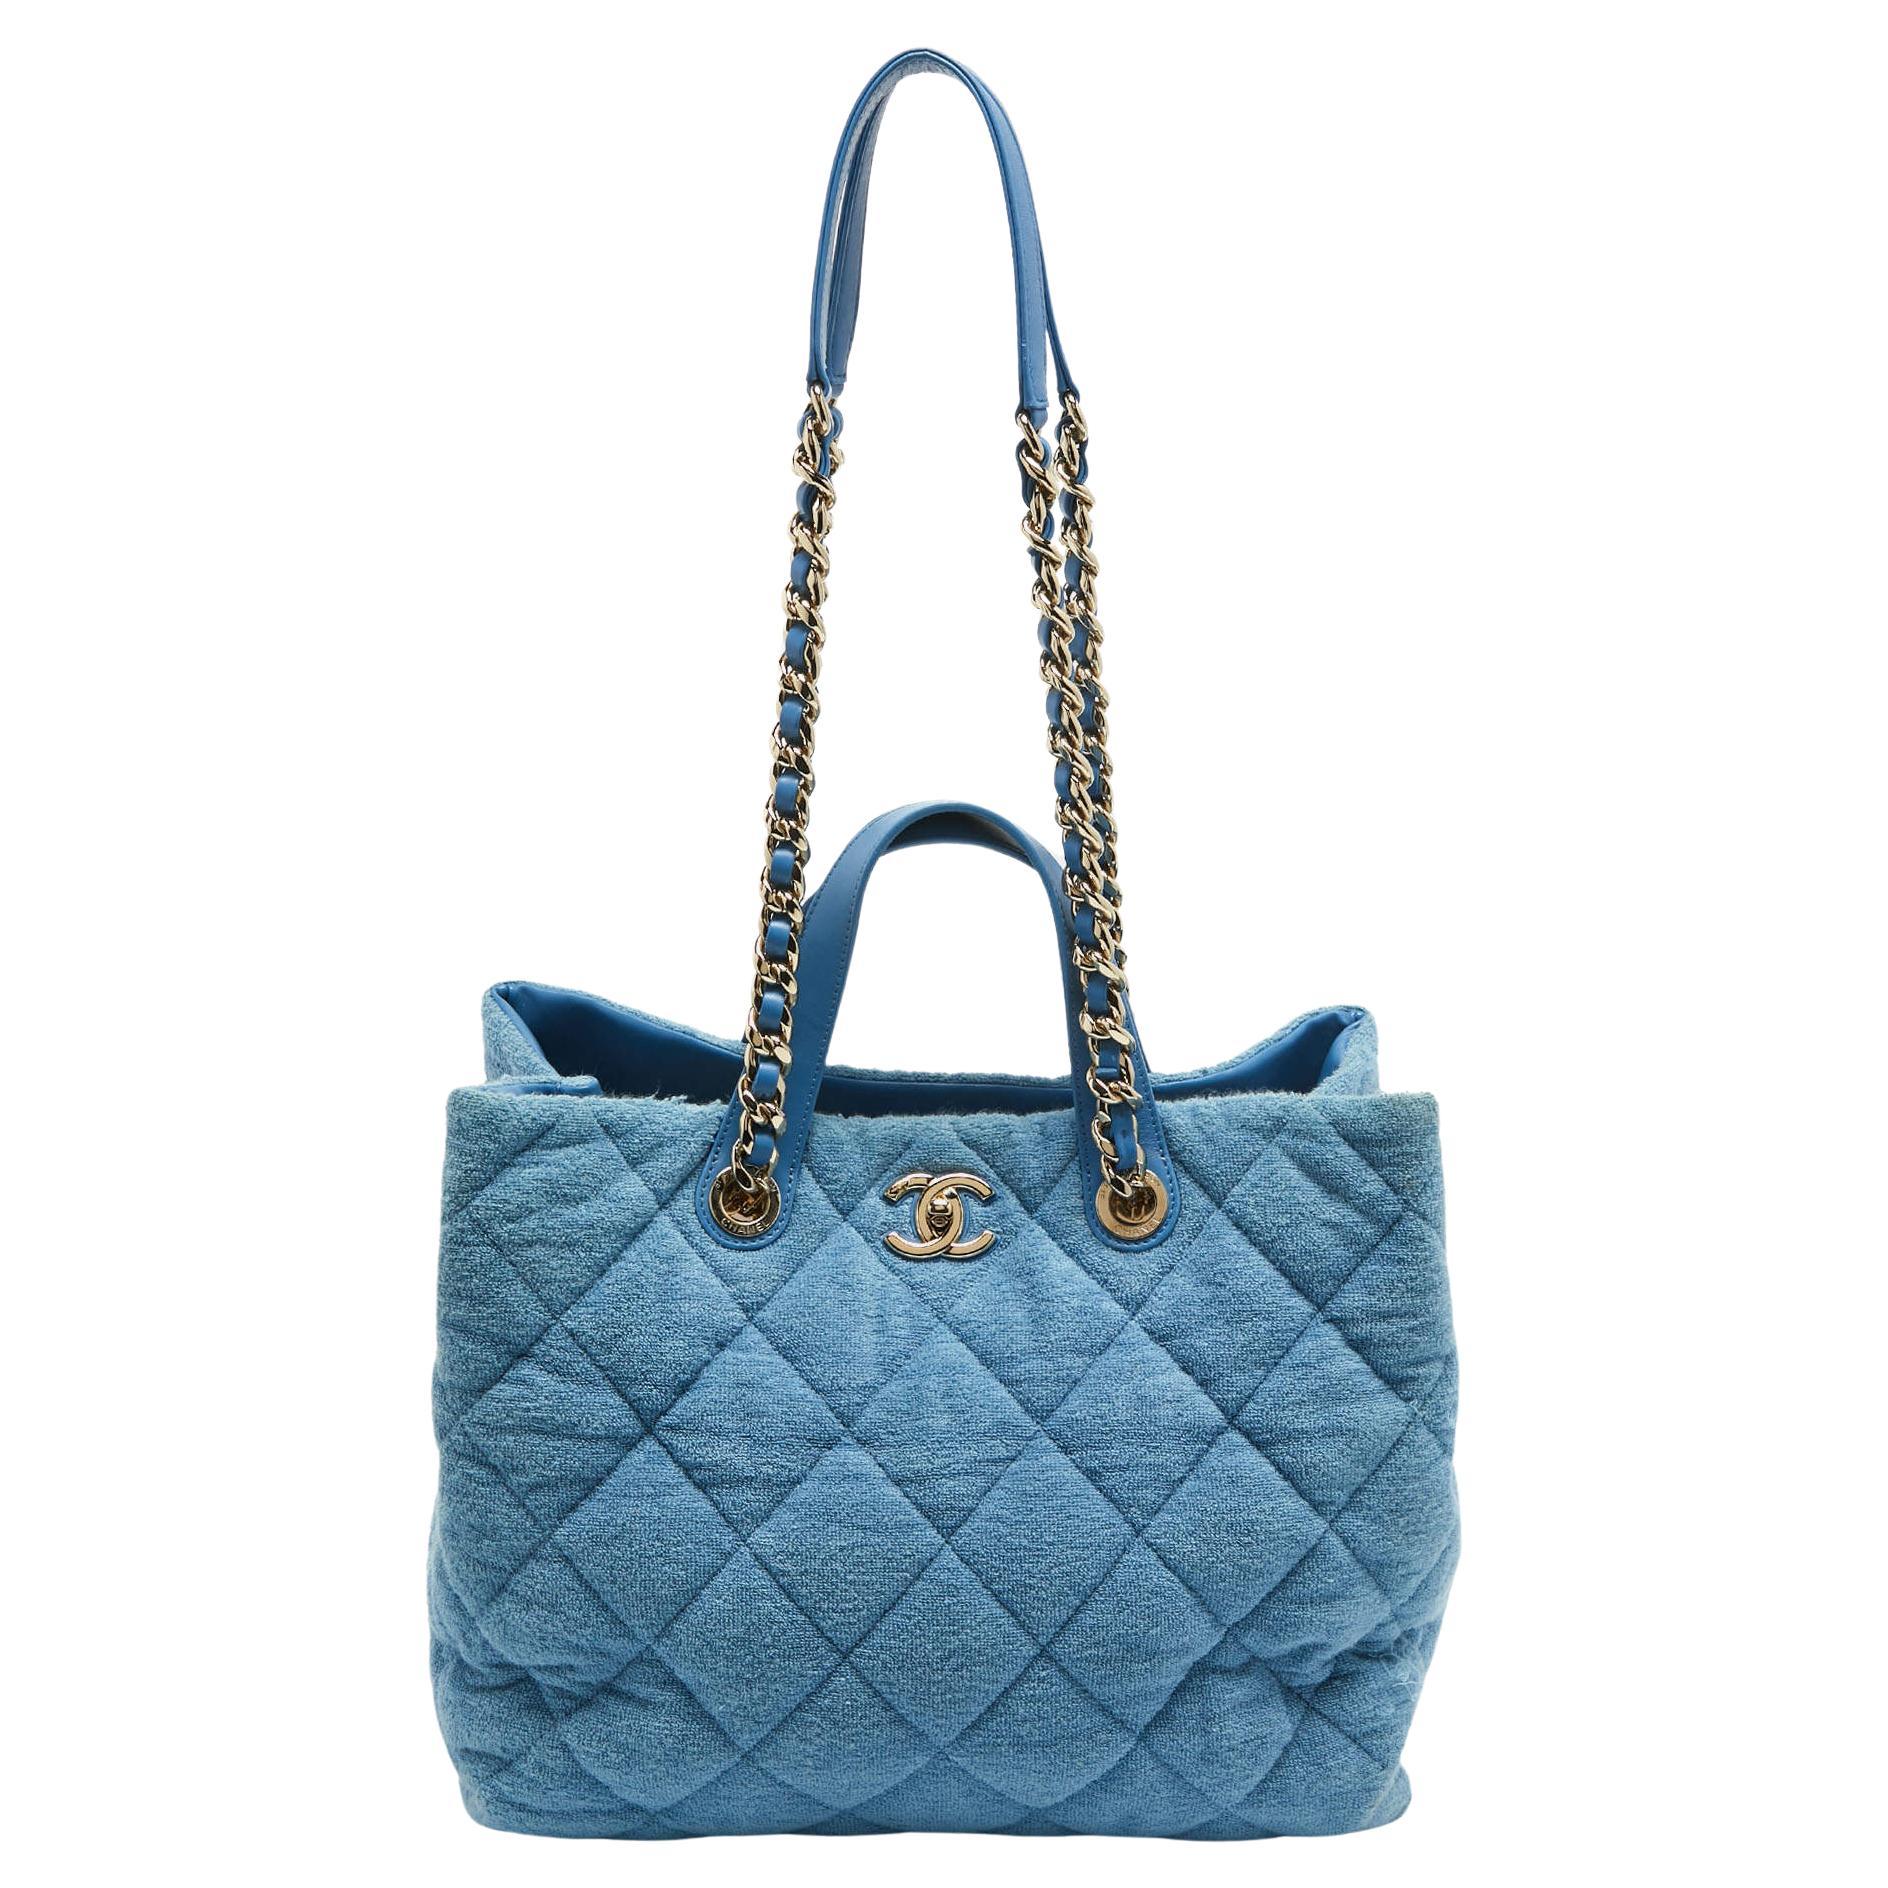 Chanel Light Blue Quilted Terry Cloth Coco Beach Shopper Tote